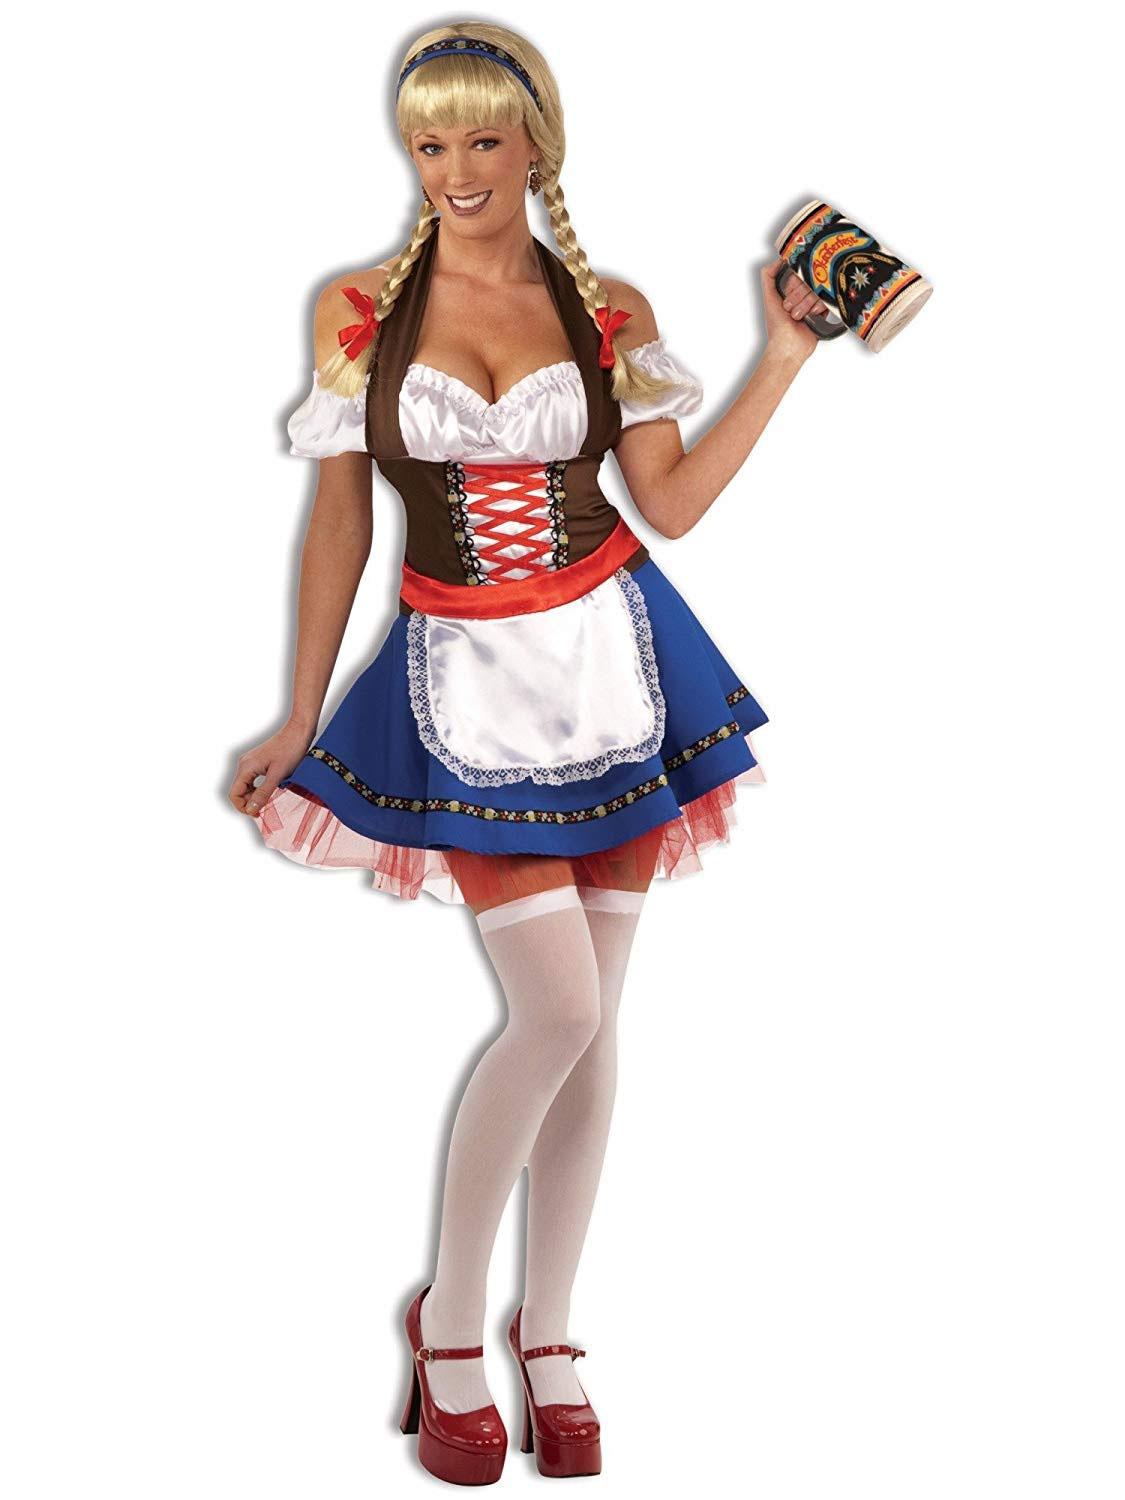 Oktoberfest Fraulein Costume for women by Bristol Novelties AC438 available from a large collection of Oktoberfest dress-up costumes here at Karnival Costumes online party shop